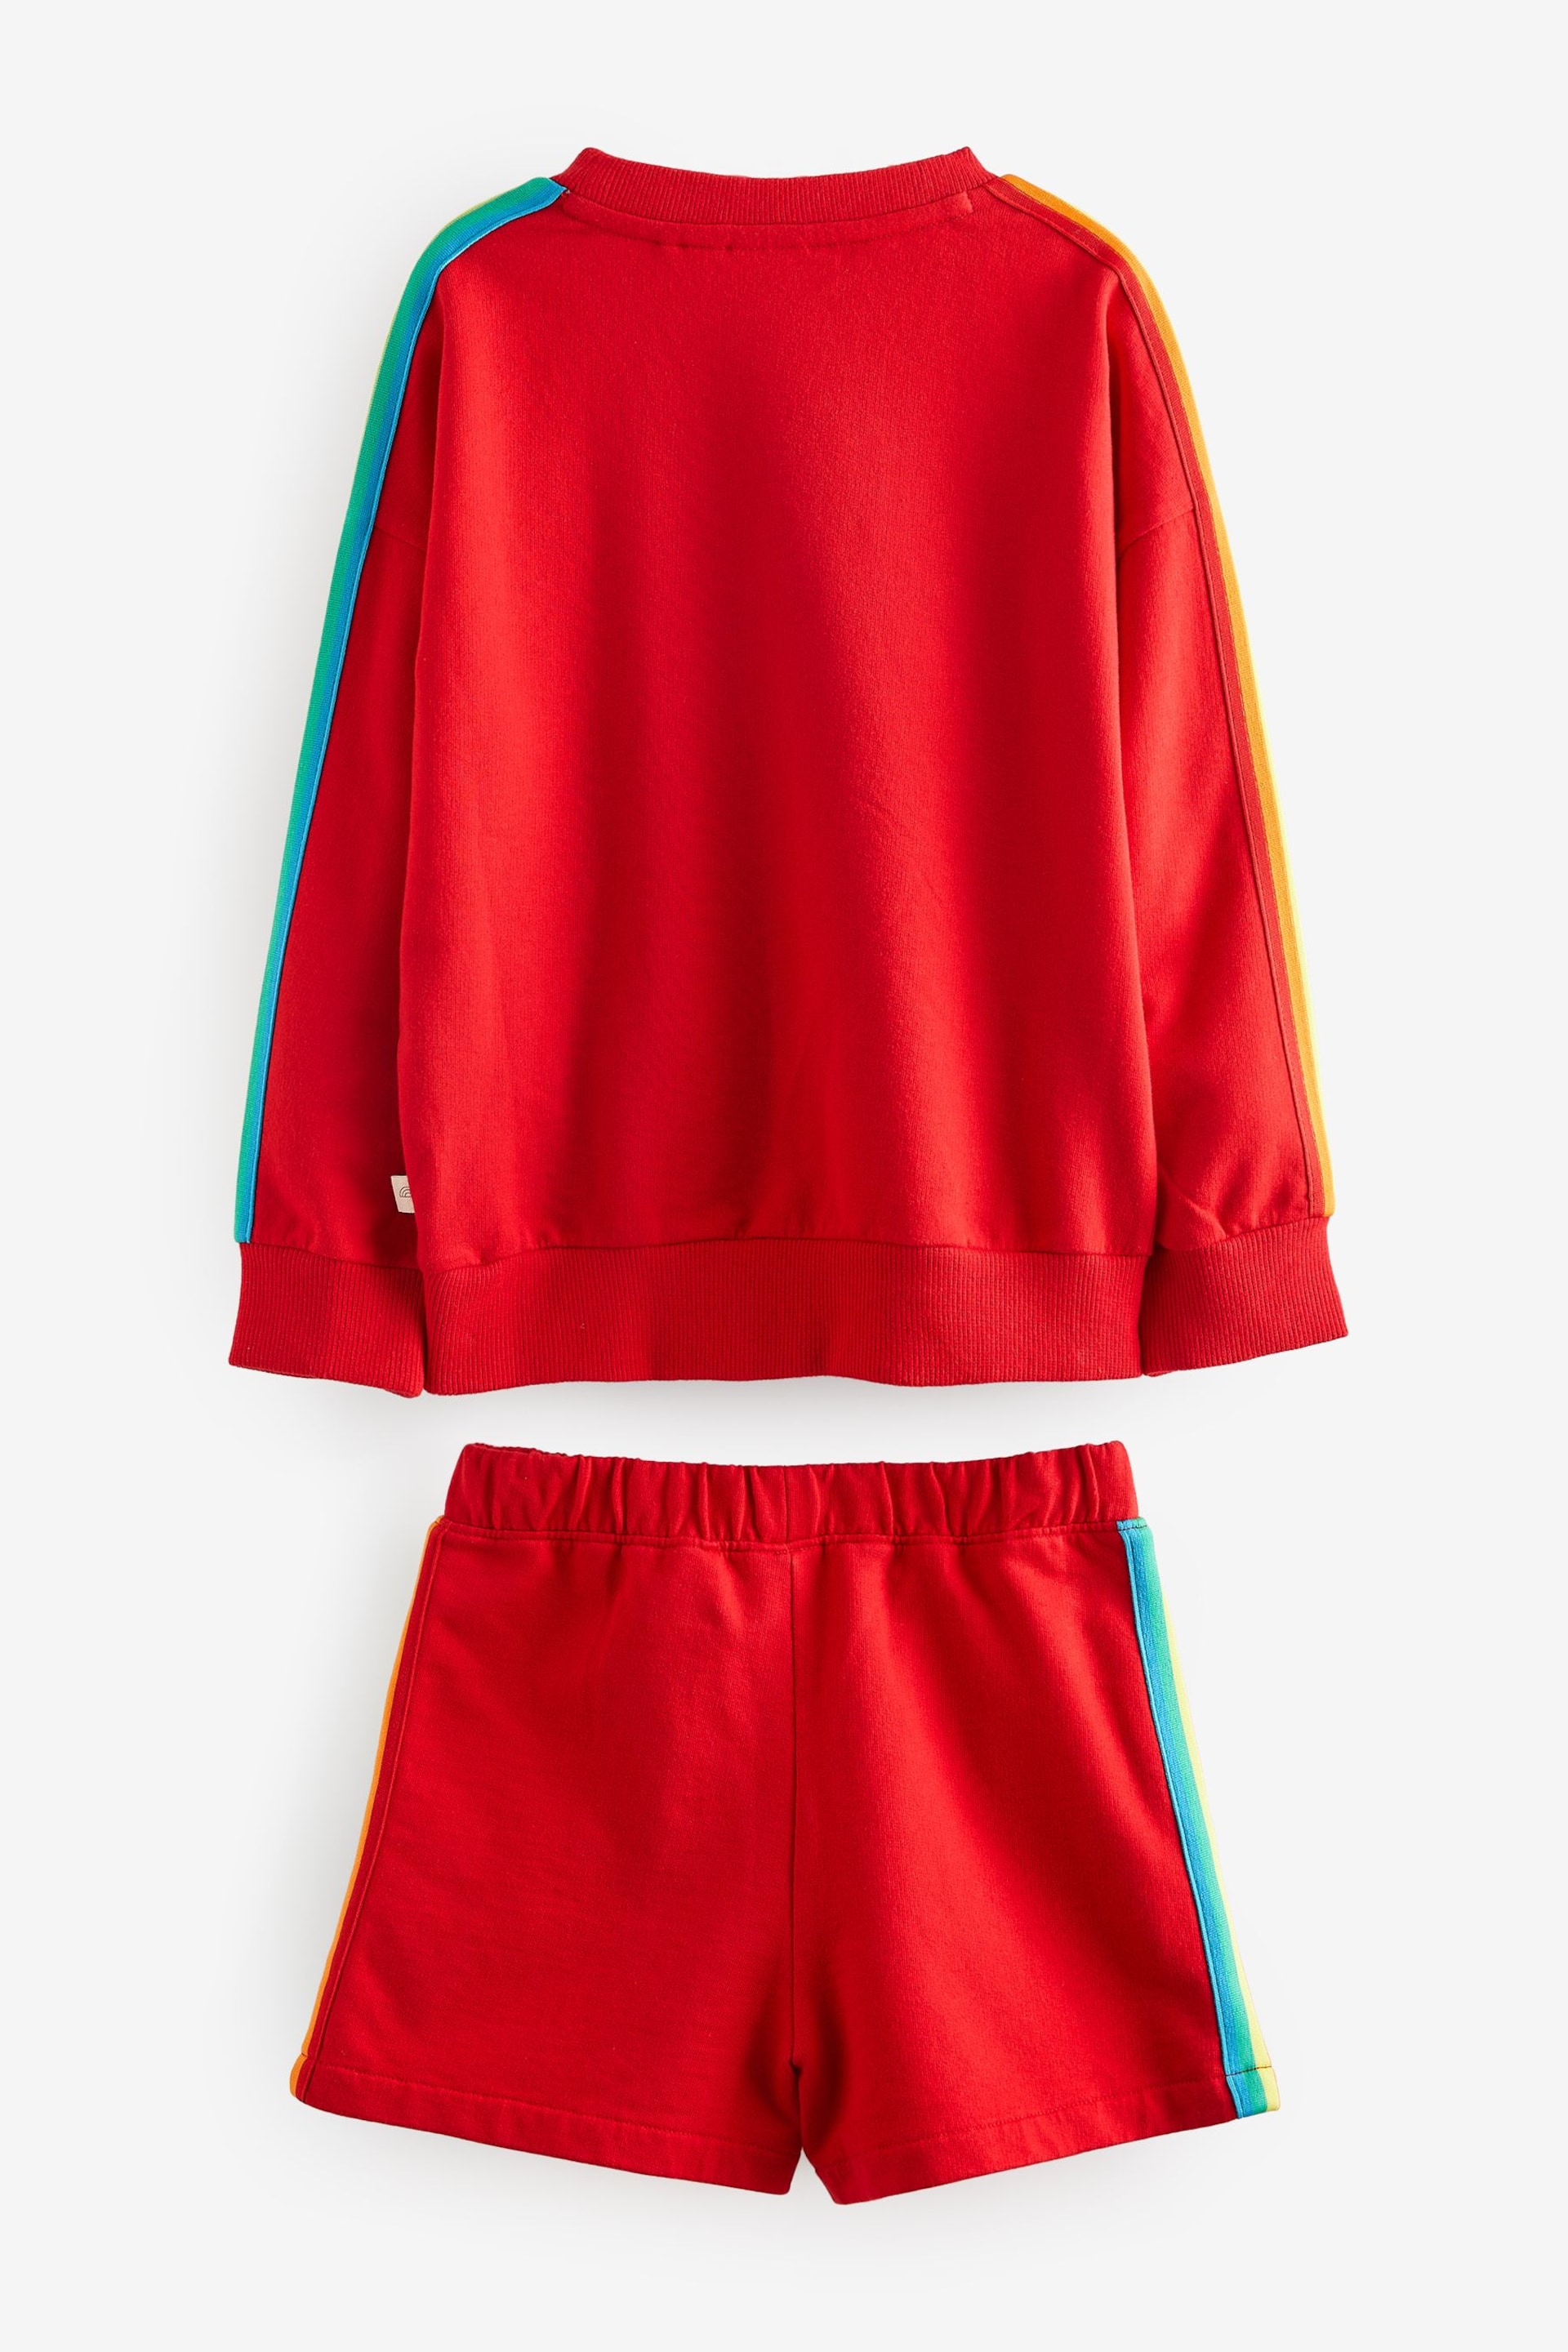 Little Bird by Jools Oliver Red Rainbow Sweat Top and Short Set - Image 13 of 14